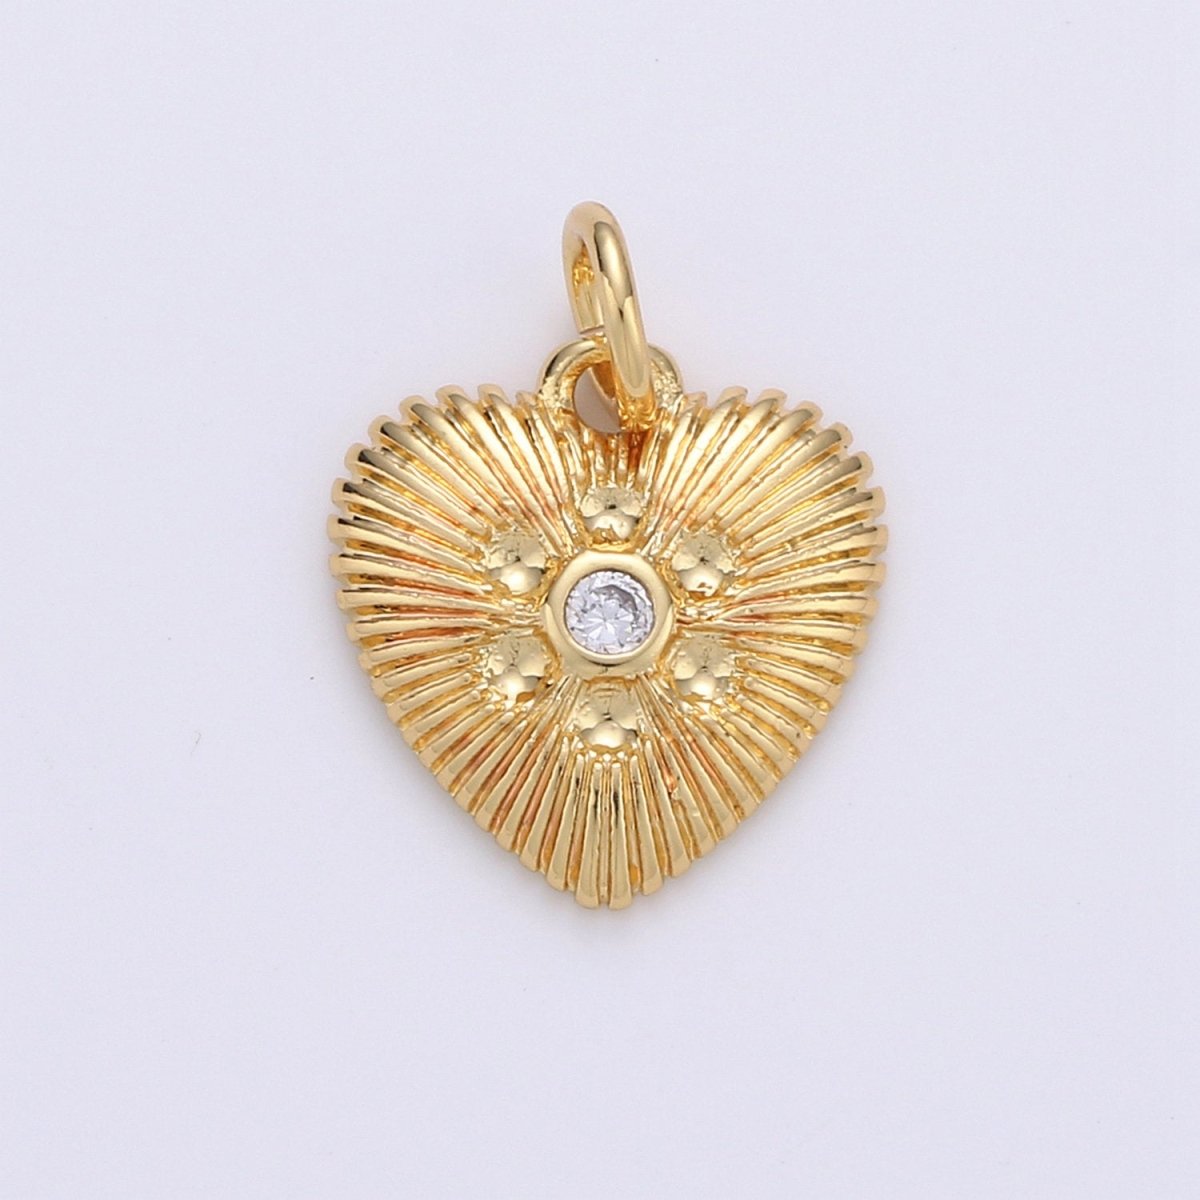 Gold Heart Charm 24k Gold Filled Micro Pave Spike Heart Amor Amore Pendant for Necklace Earring Jewelry Making D-256 D-257 - DLUXCA